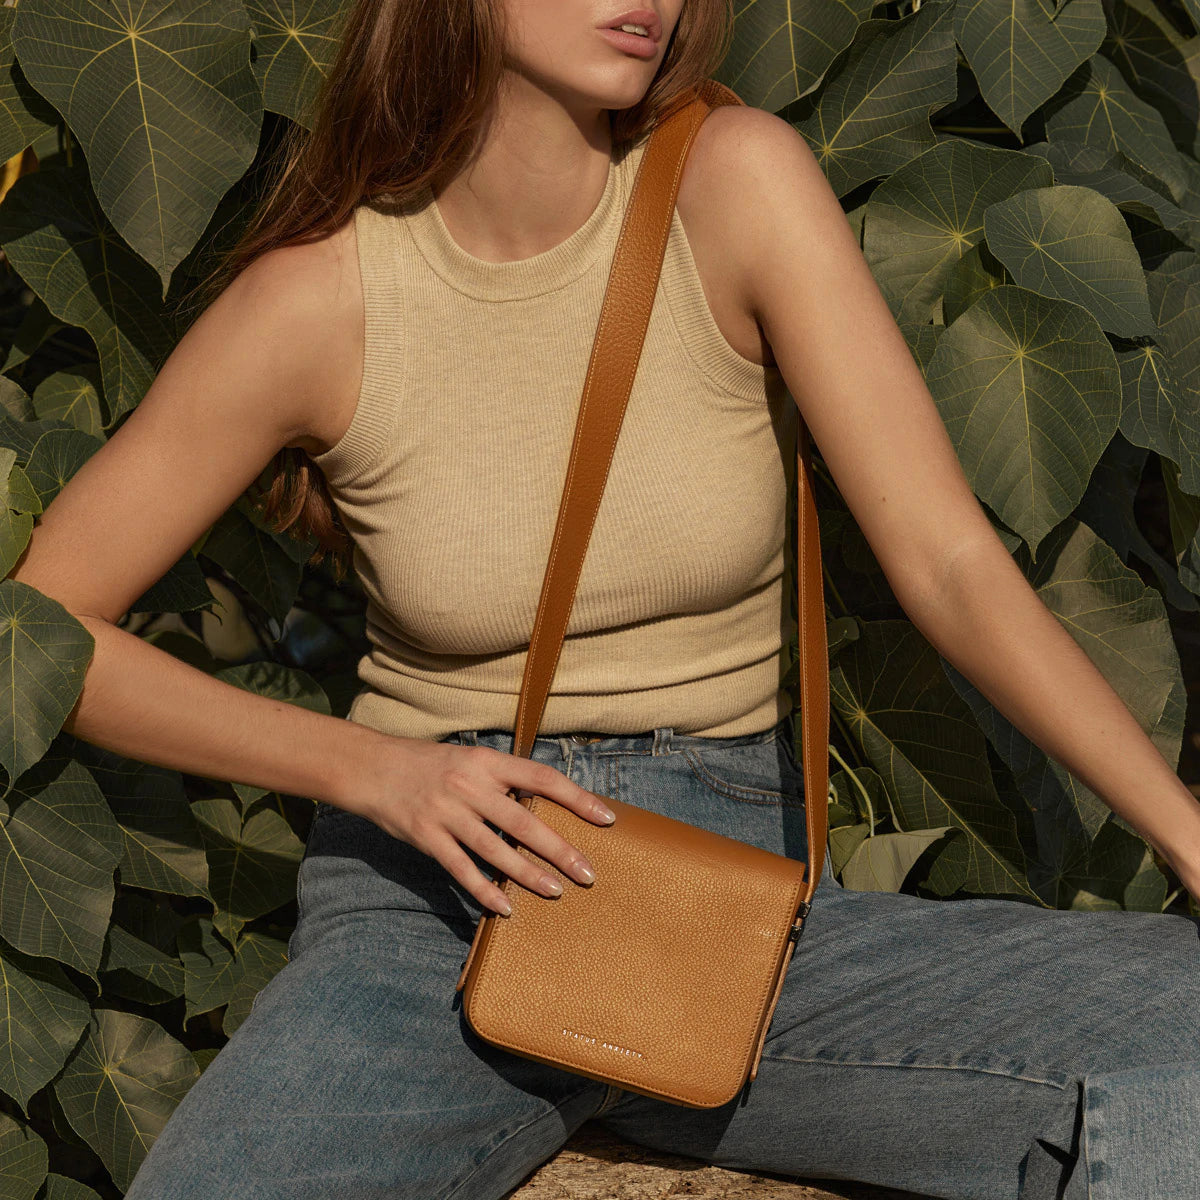 Want To Believe Leather Bag in Tan